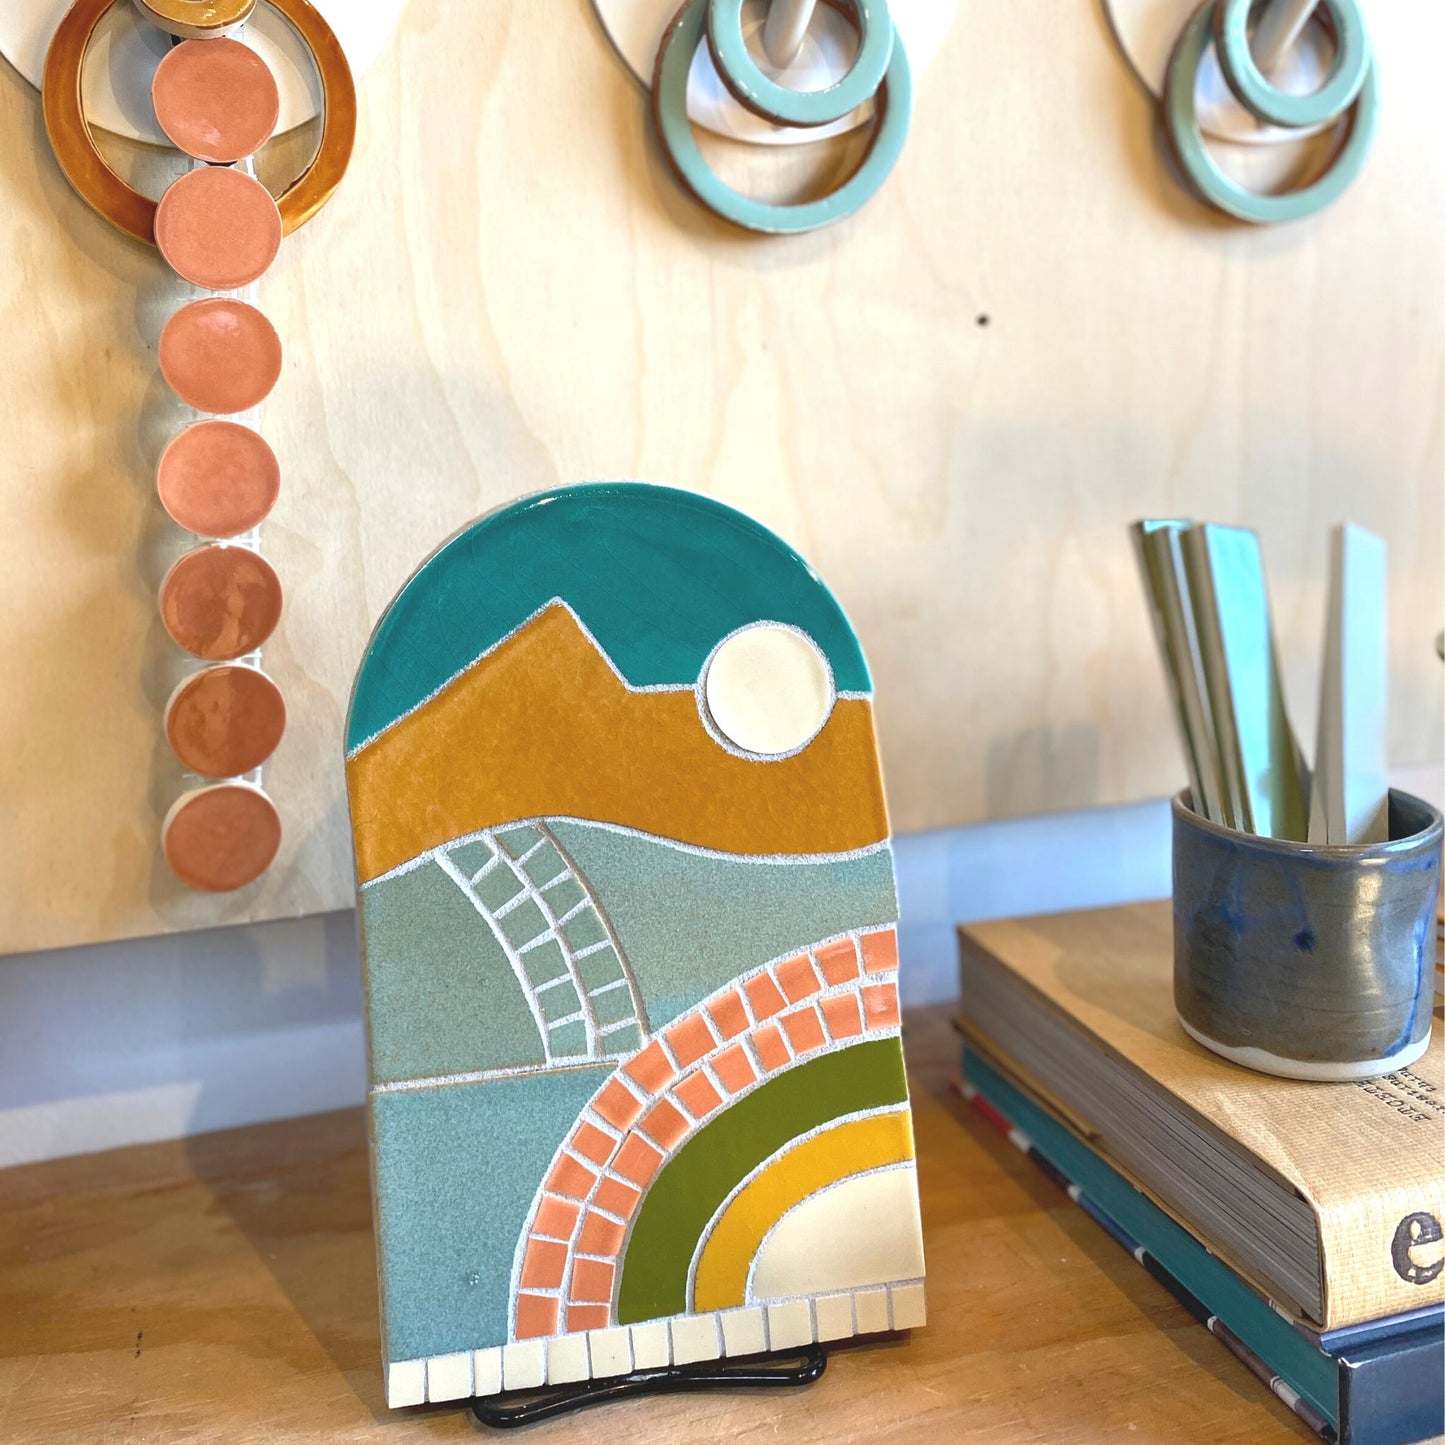 New Day Mosaic Kit in Sahara color way - assembled & styled on a bookshelf